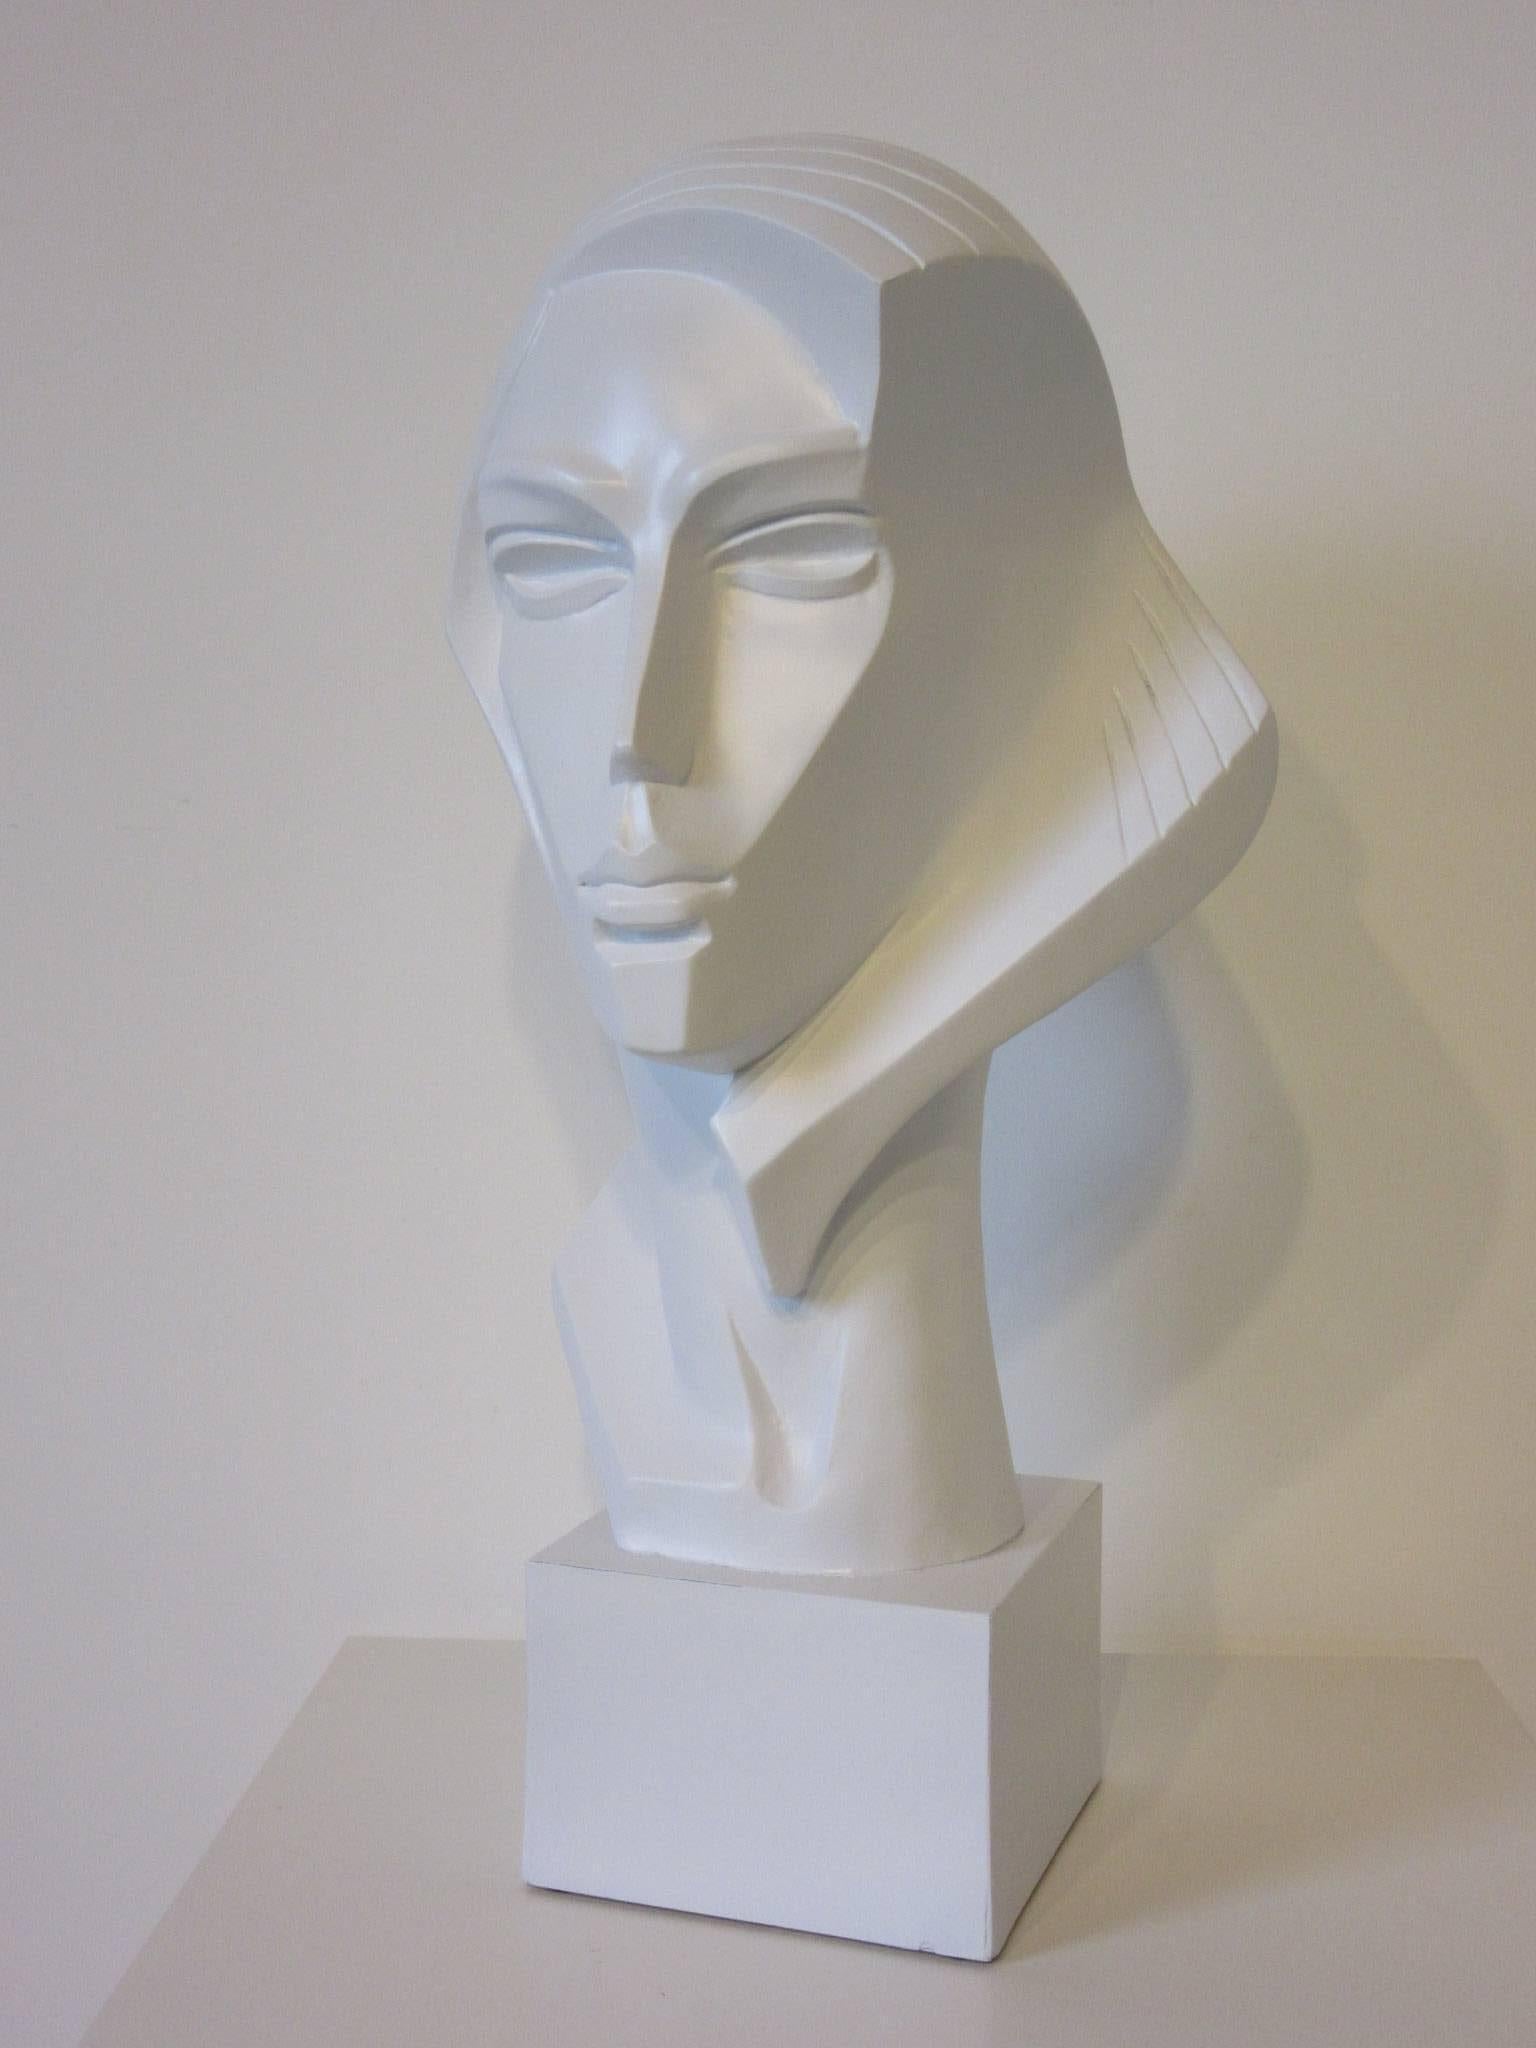 A large plaster female bust in the 1980s vibe reminiscent of Studio 54 in satin white on a wooden base, signed to the back neck area Austin Products 1987, Fischer.